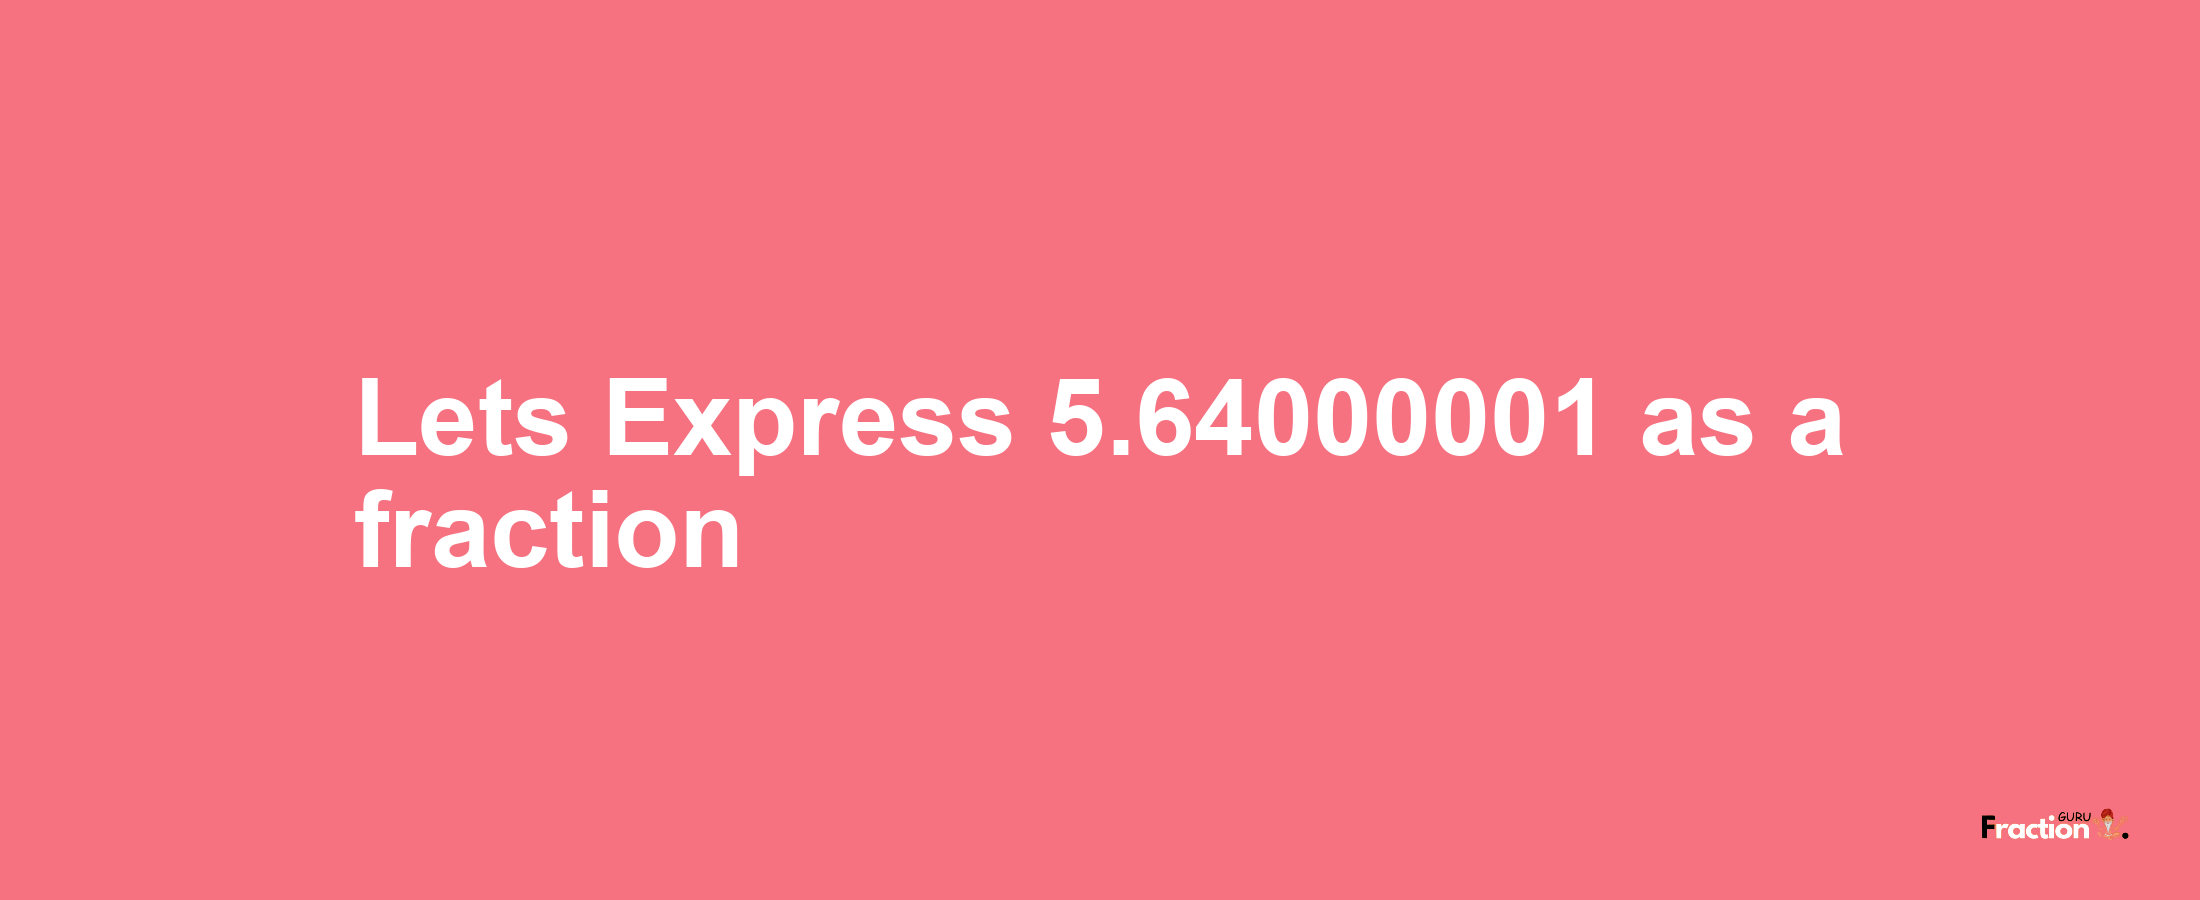 Lets Express 5.64000001 as afraction